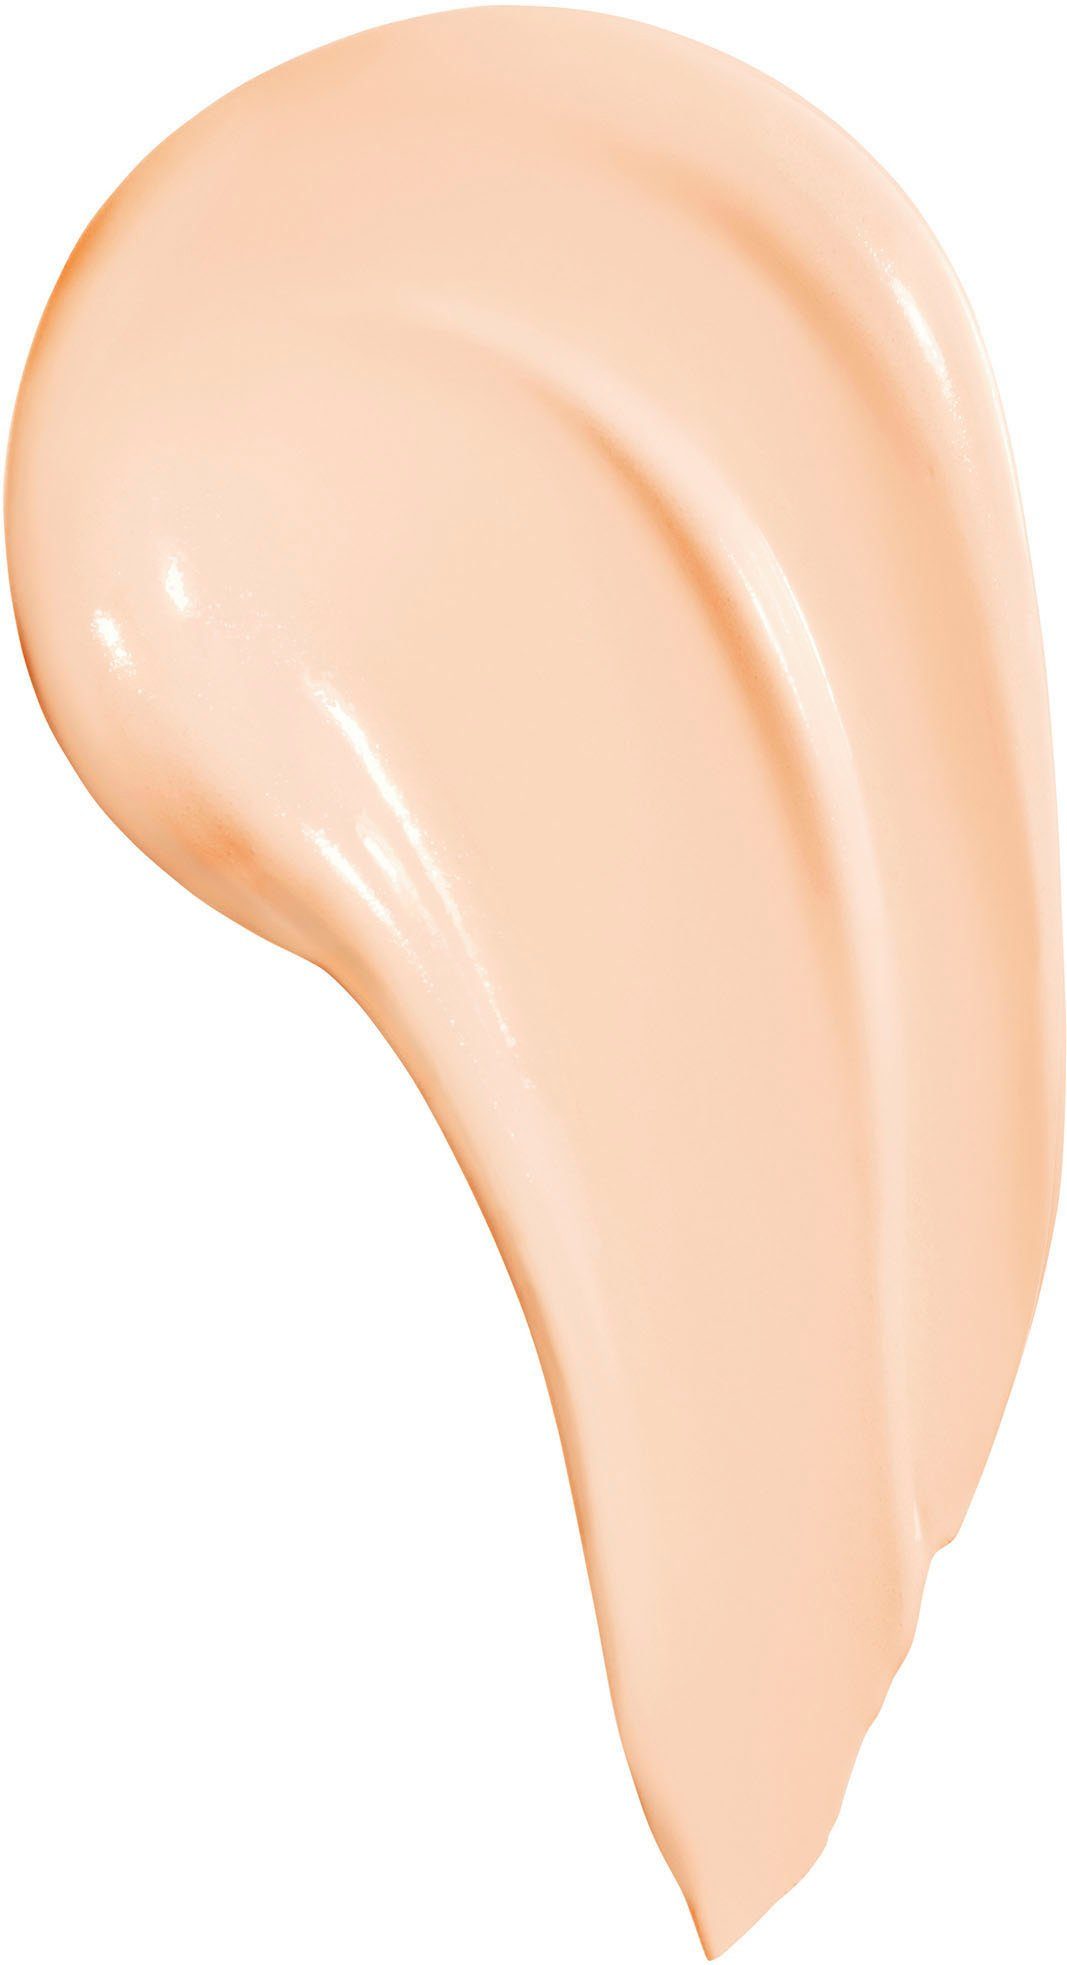 Ivory 3 Wear True Stay Super YORK NEW MAYBELLINE Active Foundation